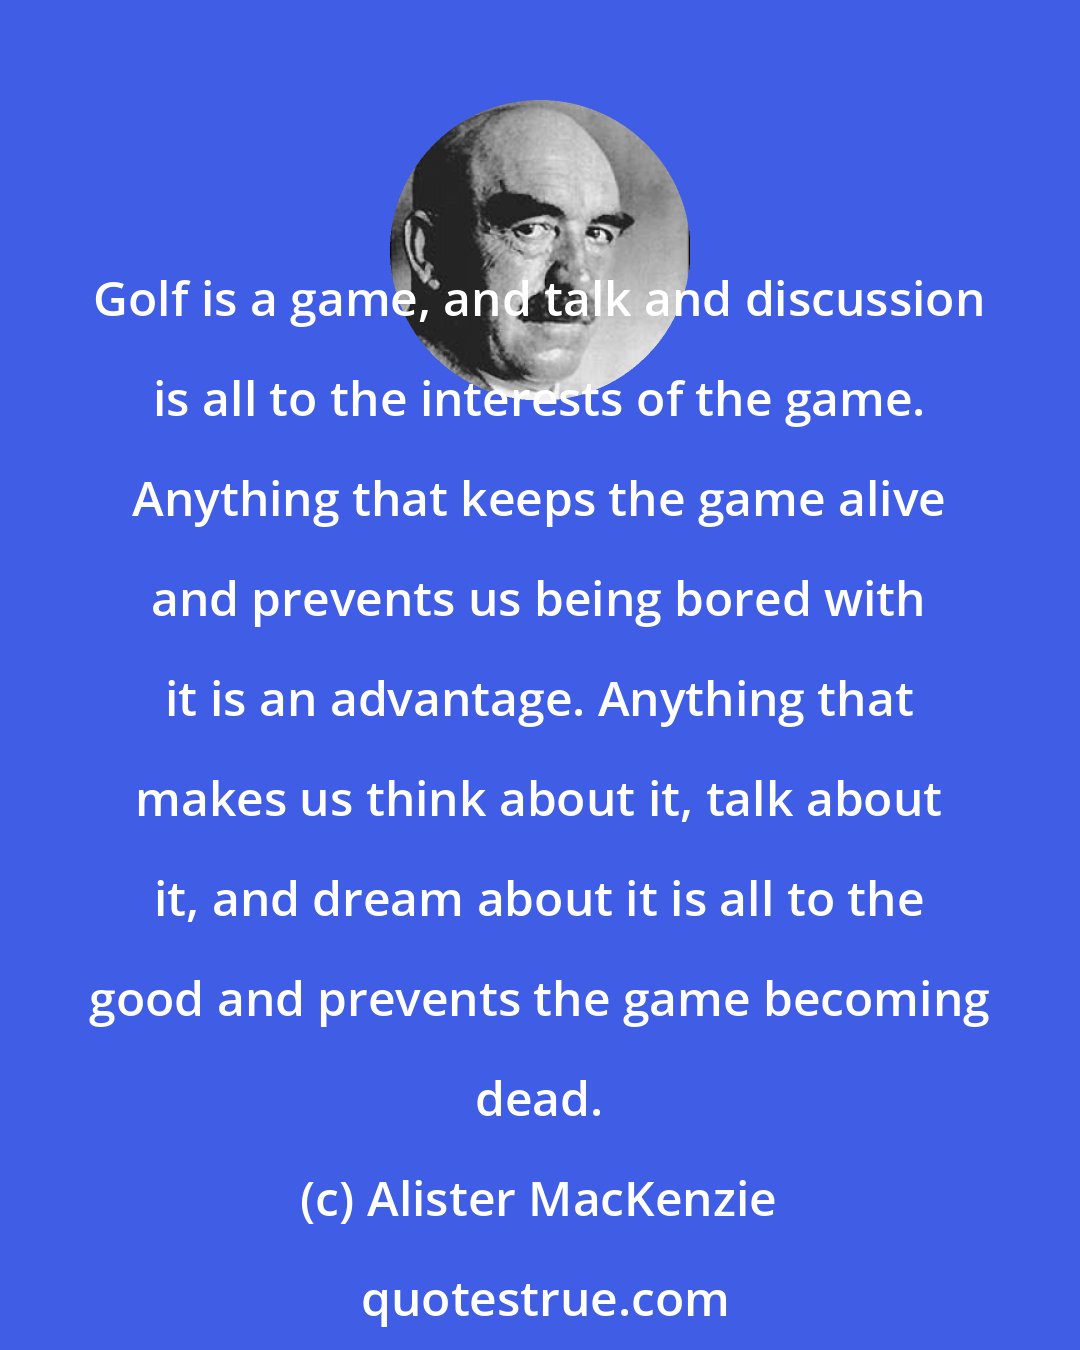 Alister MacKenzie: Golf is a game, and talk and discussion is all to the interests of the game. Anything that keeps the game alive and prevents us being bored with it is an advantage. Anything that makes us think about it, talk about it, and dream about it is all to the good and prevents the game becoming dead.